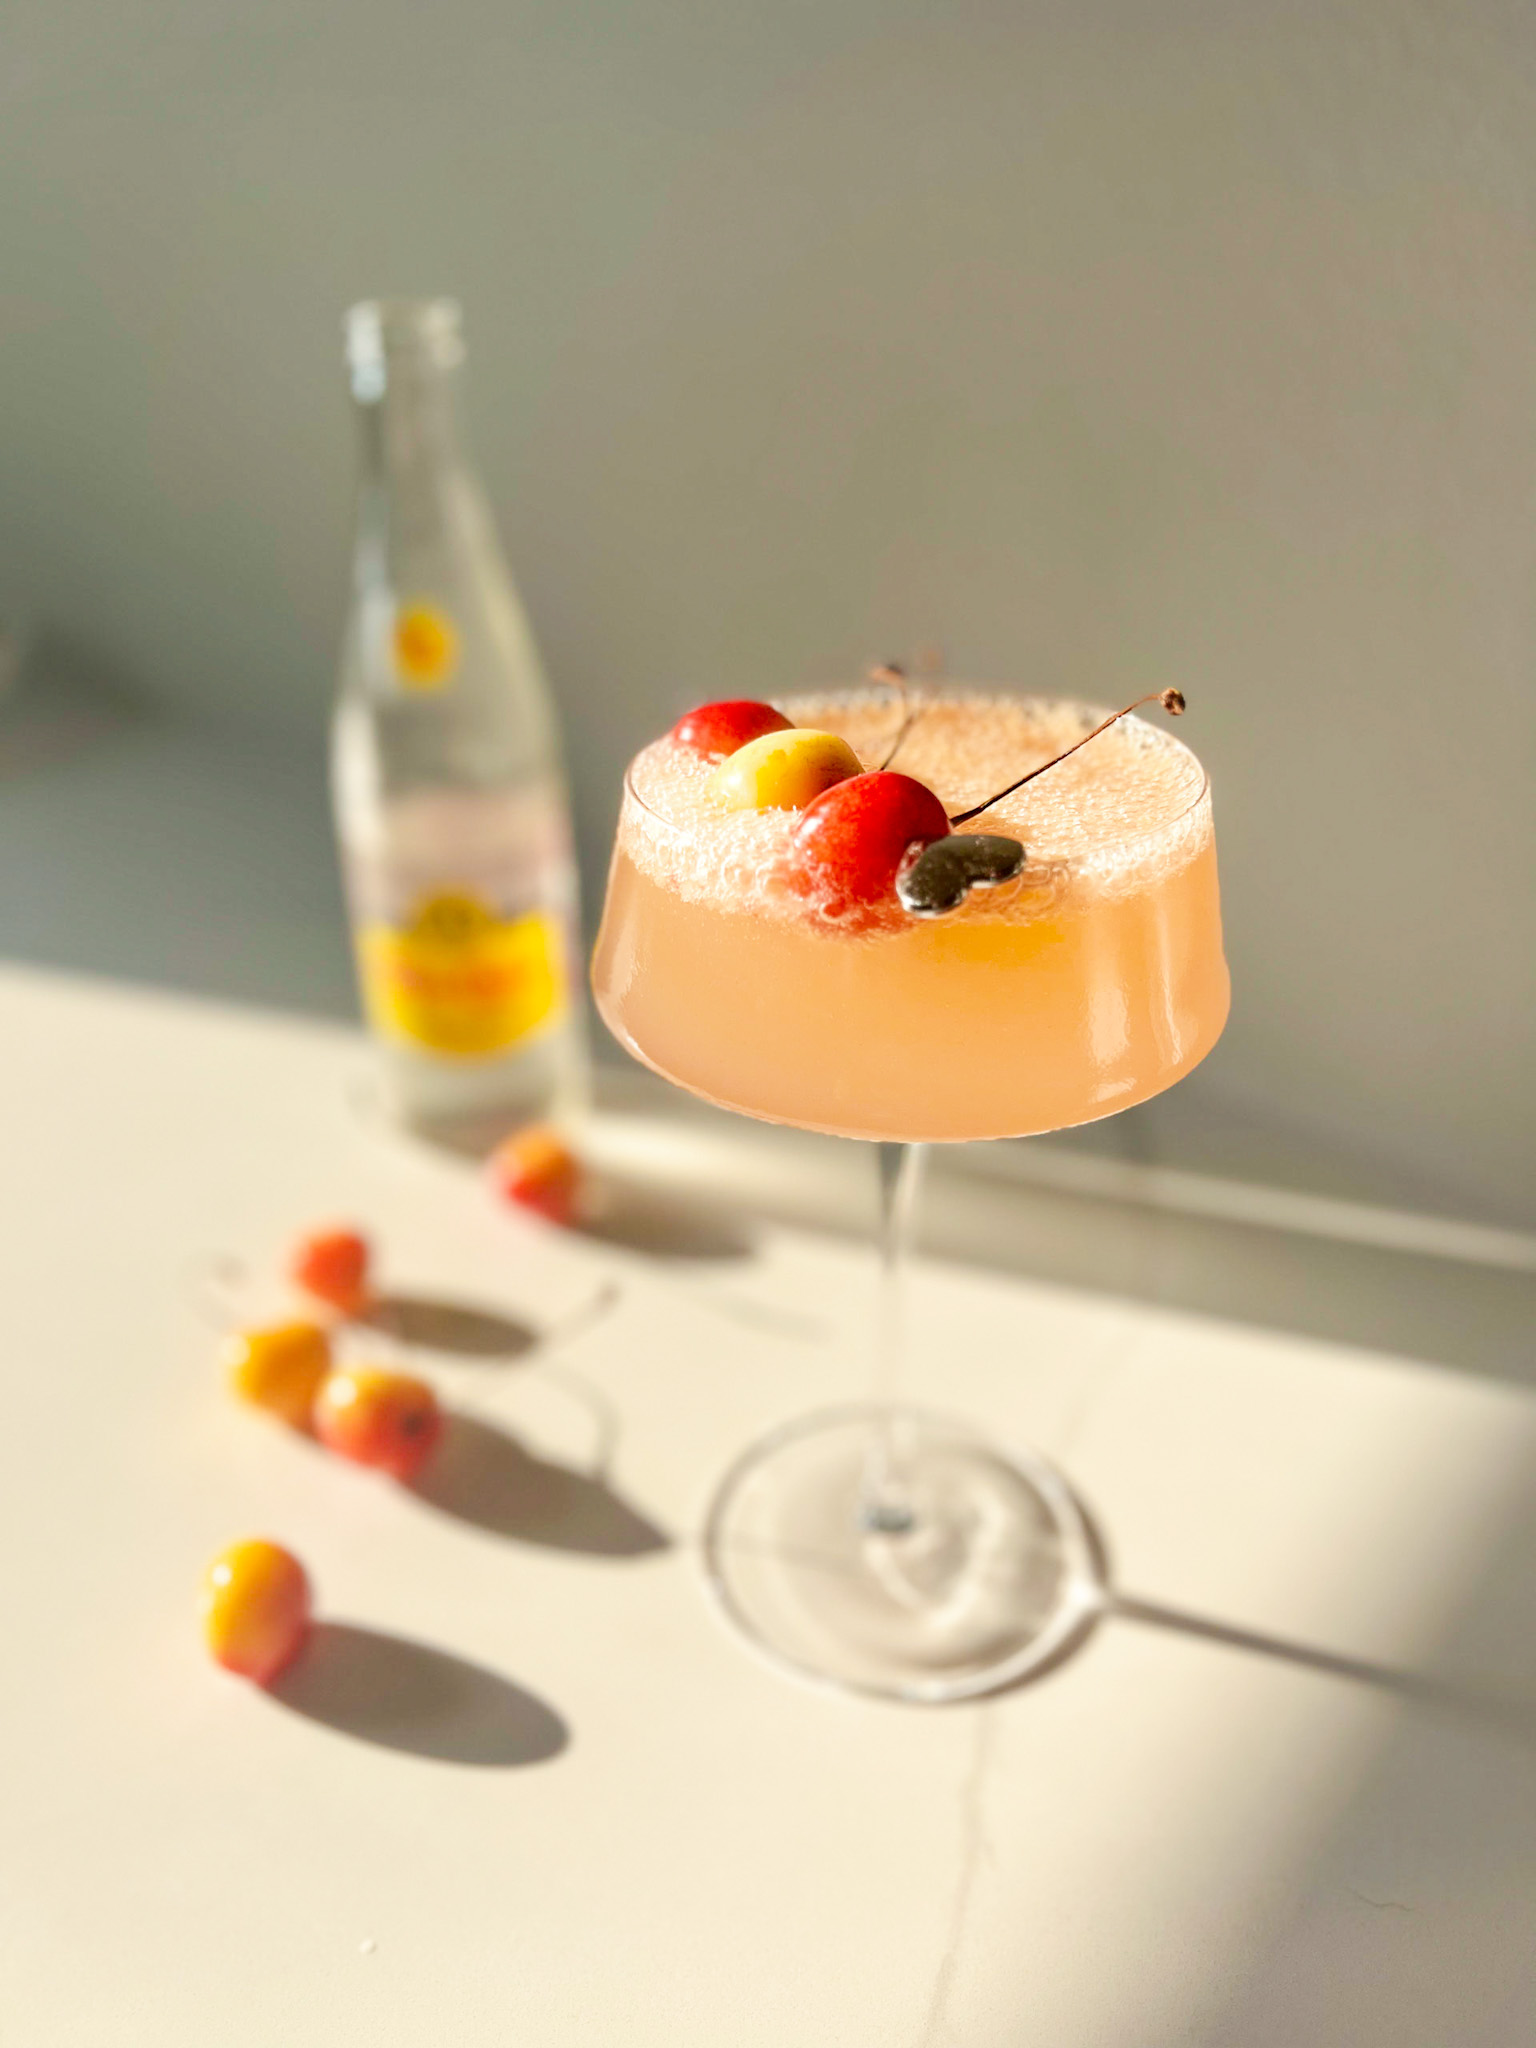 Mocktail version of a cherry sea breeze in a martini glass with a bottle of Topo Chico